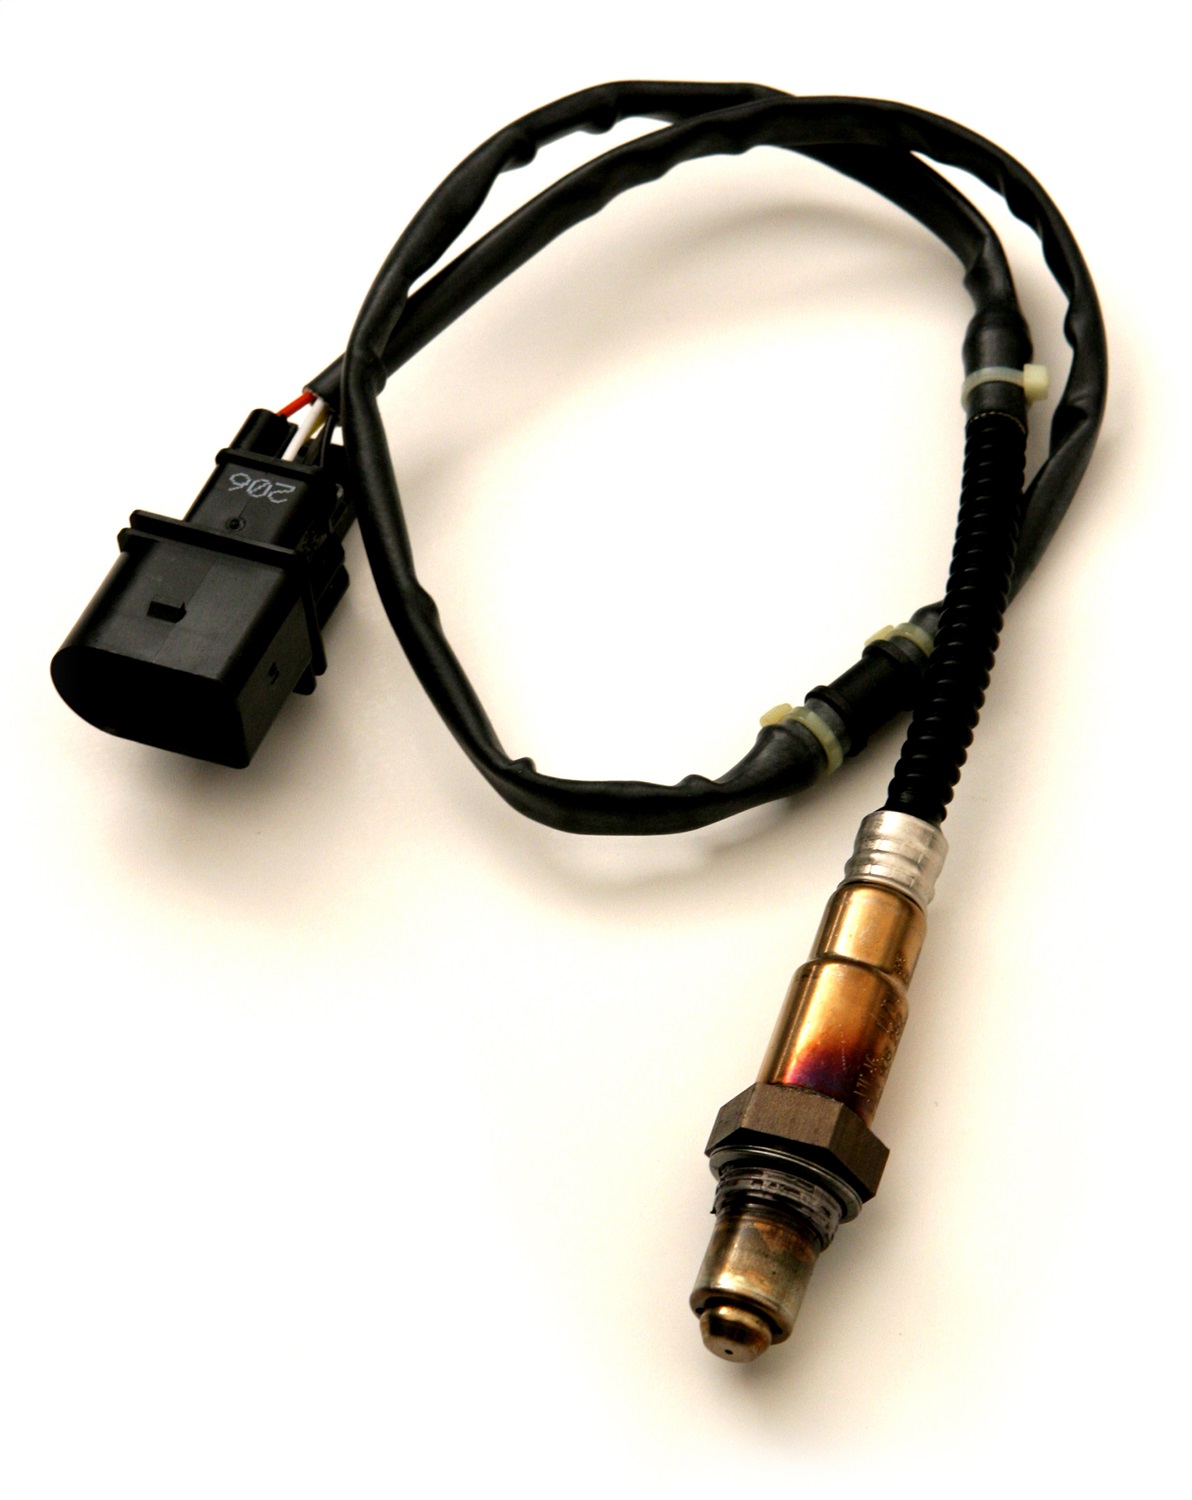 INNOVATE MTR 3737 Wideband Oxygen Sensor Single Sensor with 3 Wire Connector